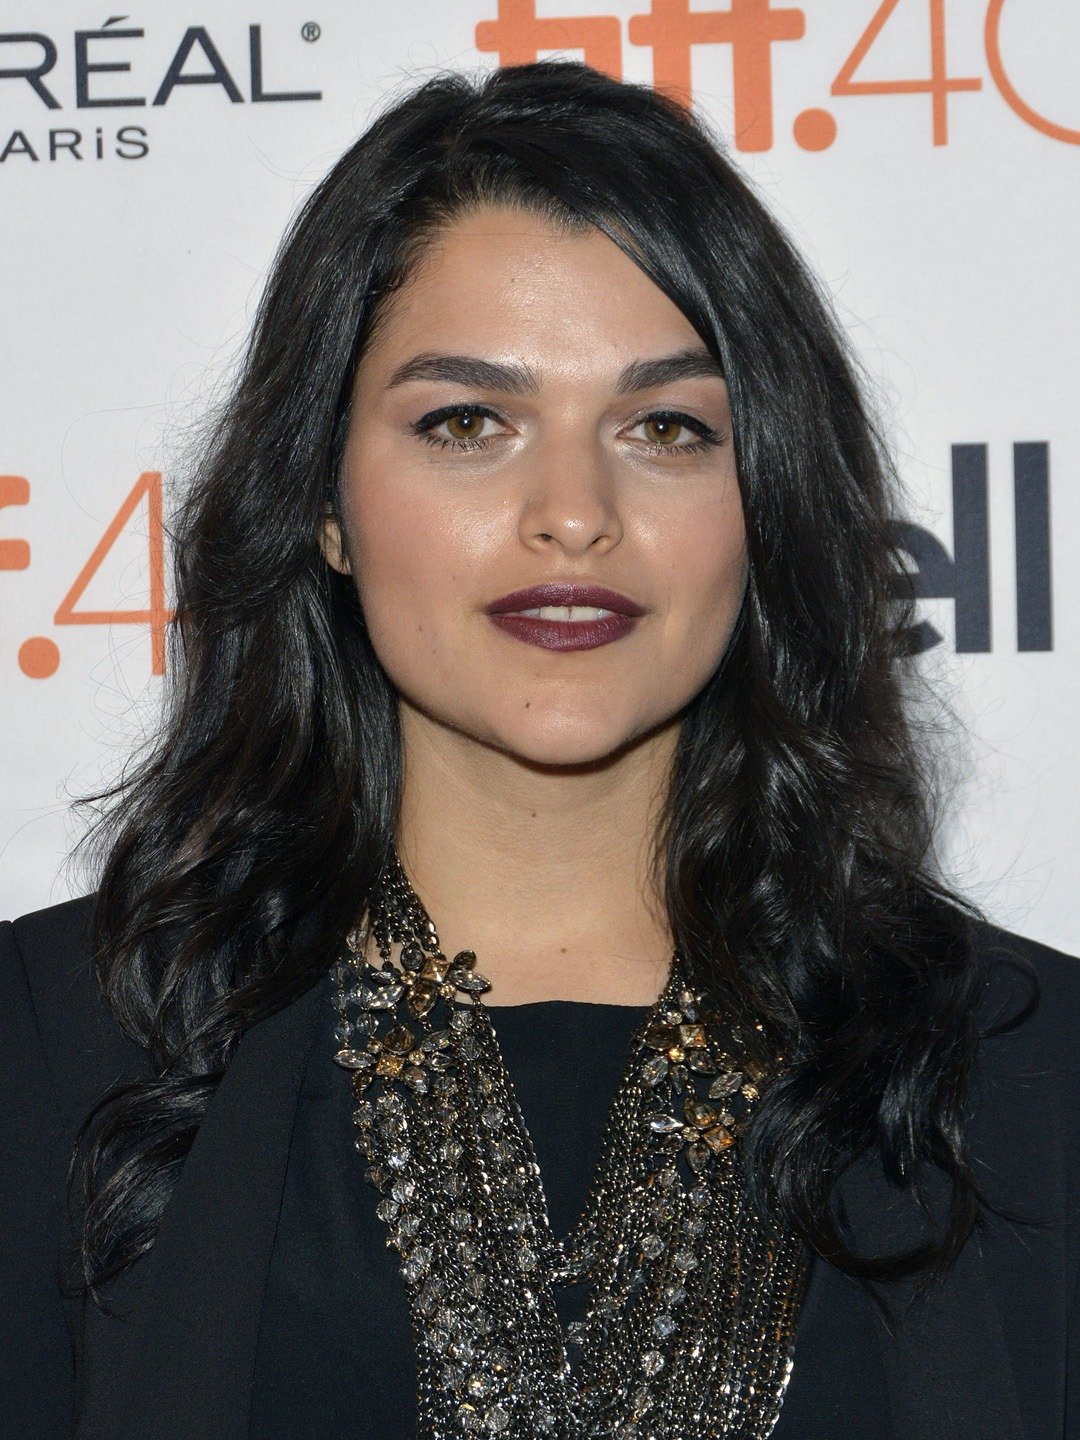 How tall is Eve Harlow?